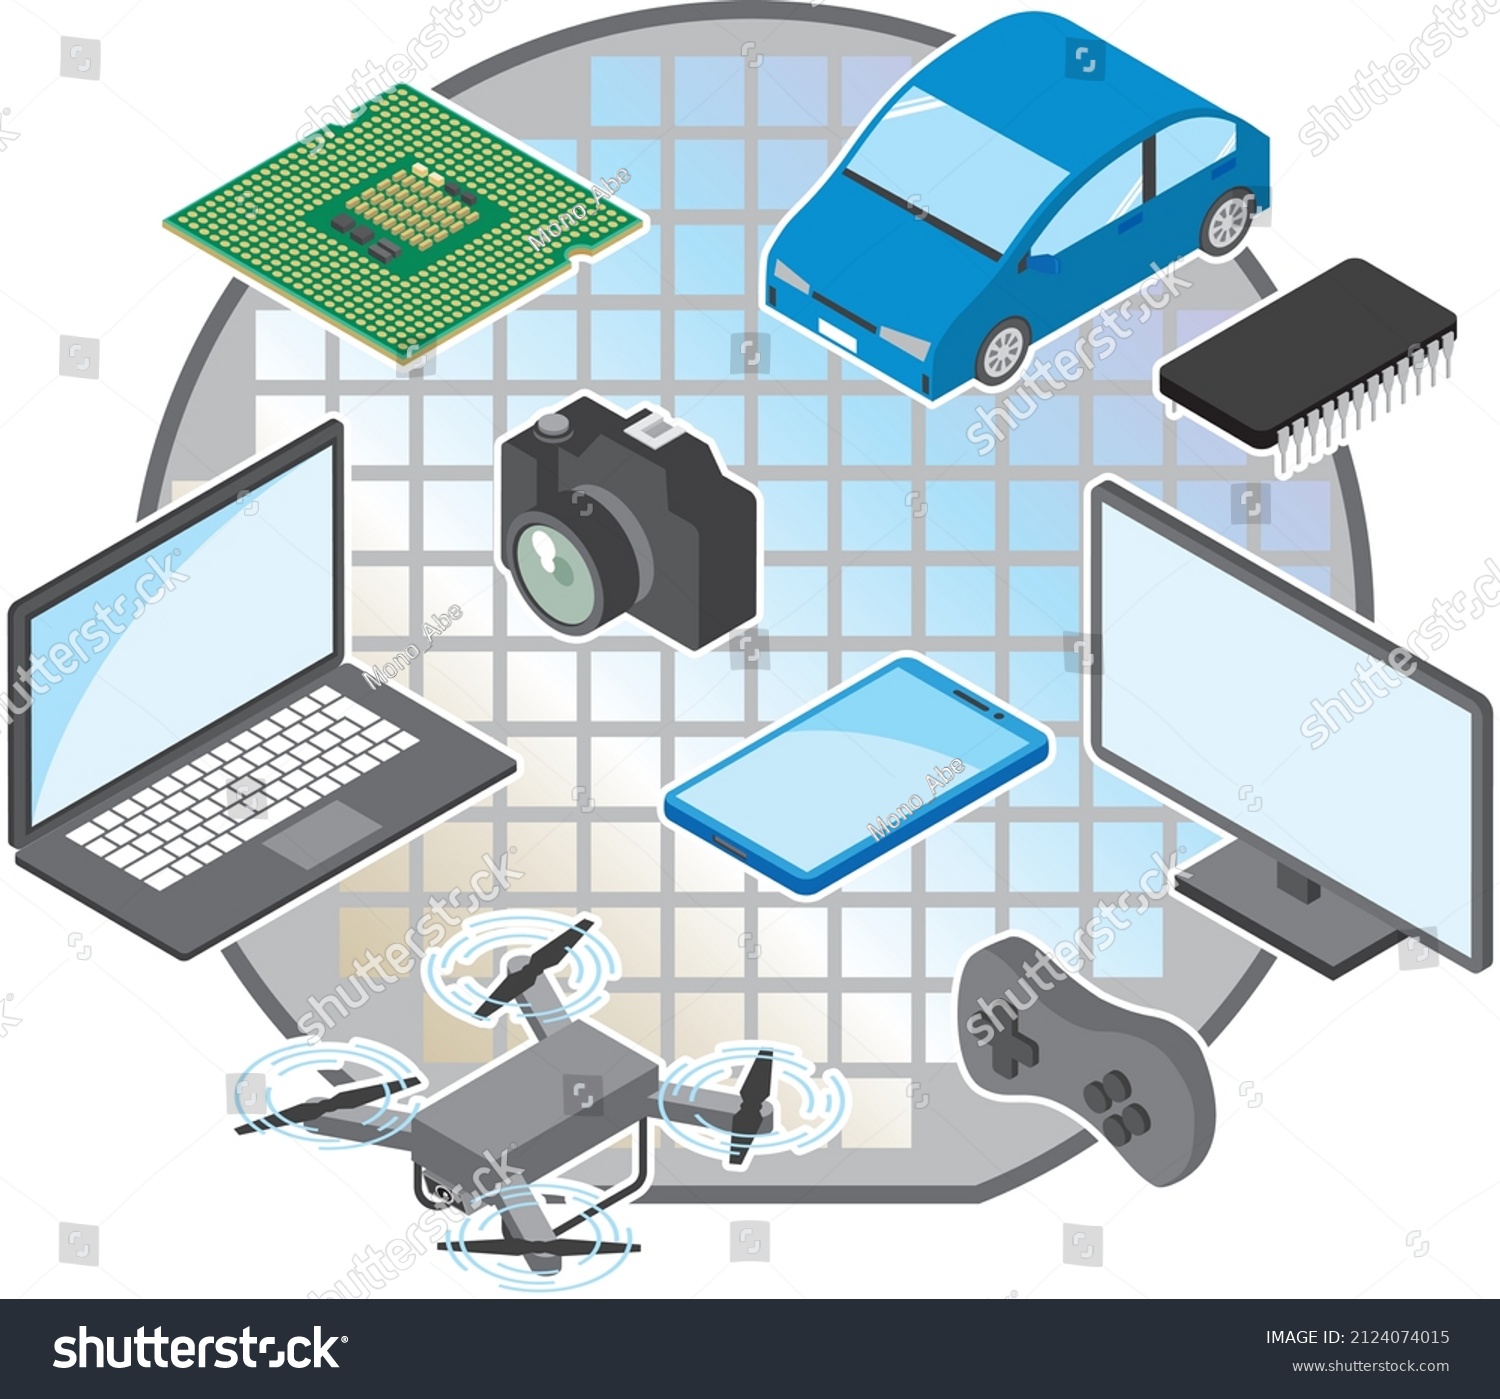 SVG of Image illustration of applications where semiconductors are used svg